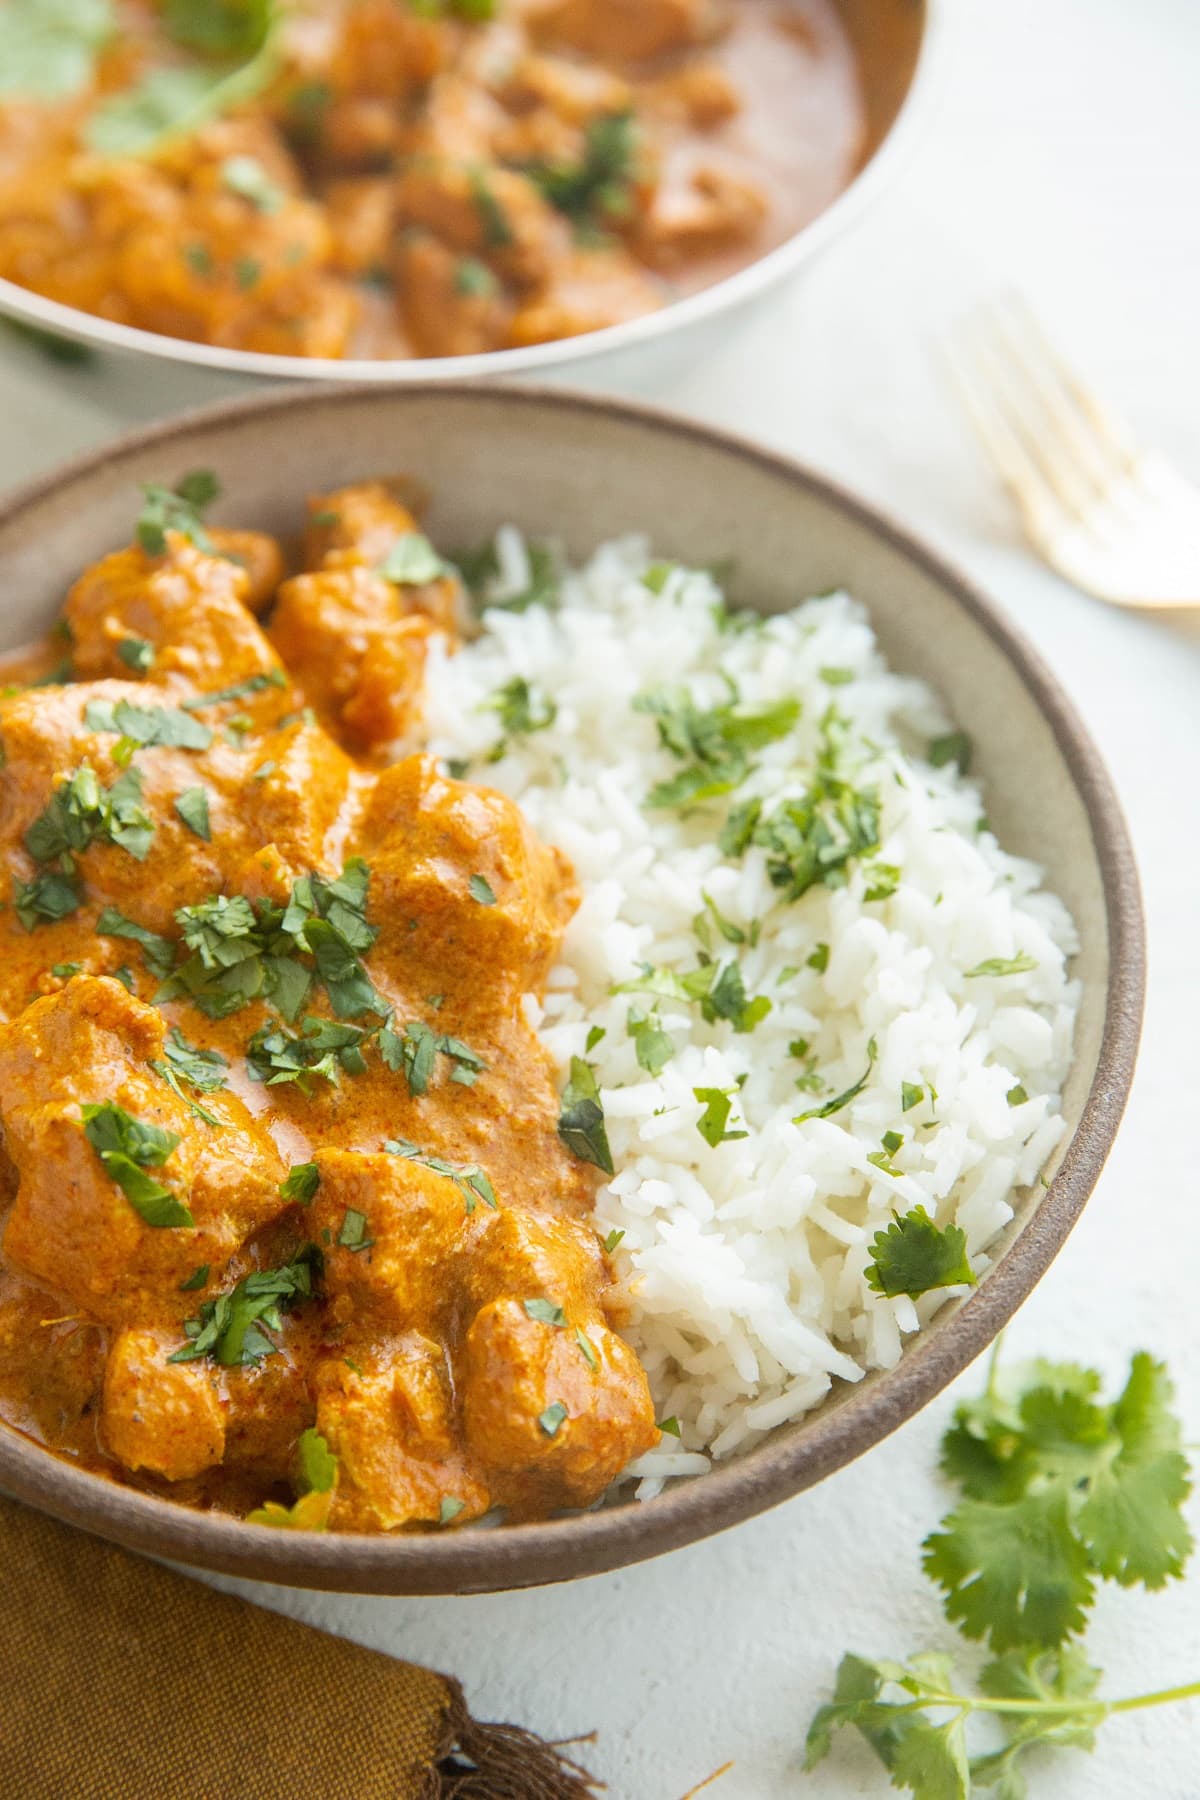 Angled shot of a bowl of chicken tikka masala with white rice.